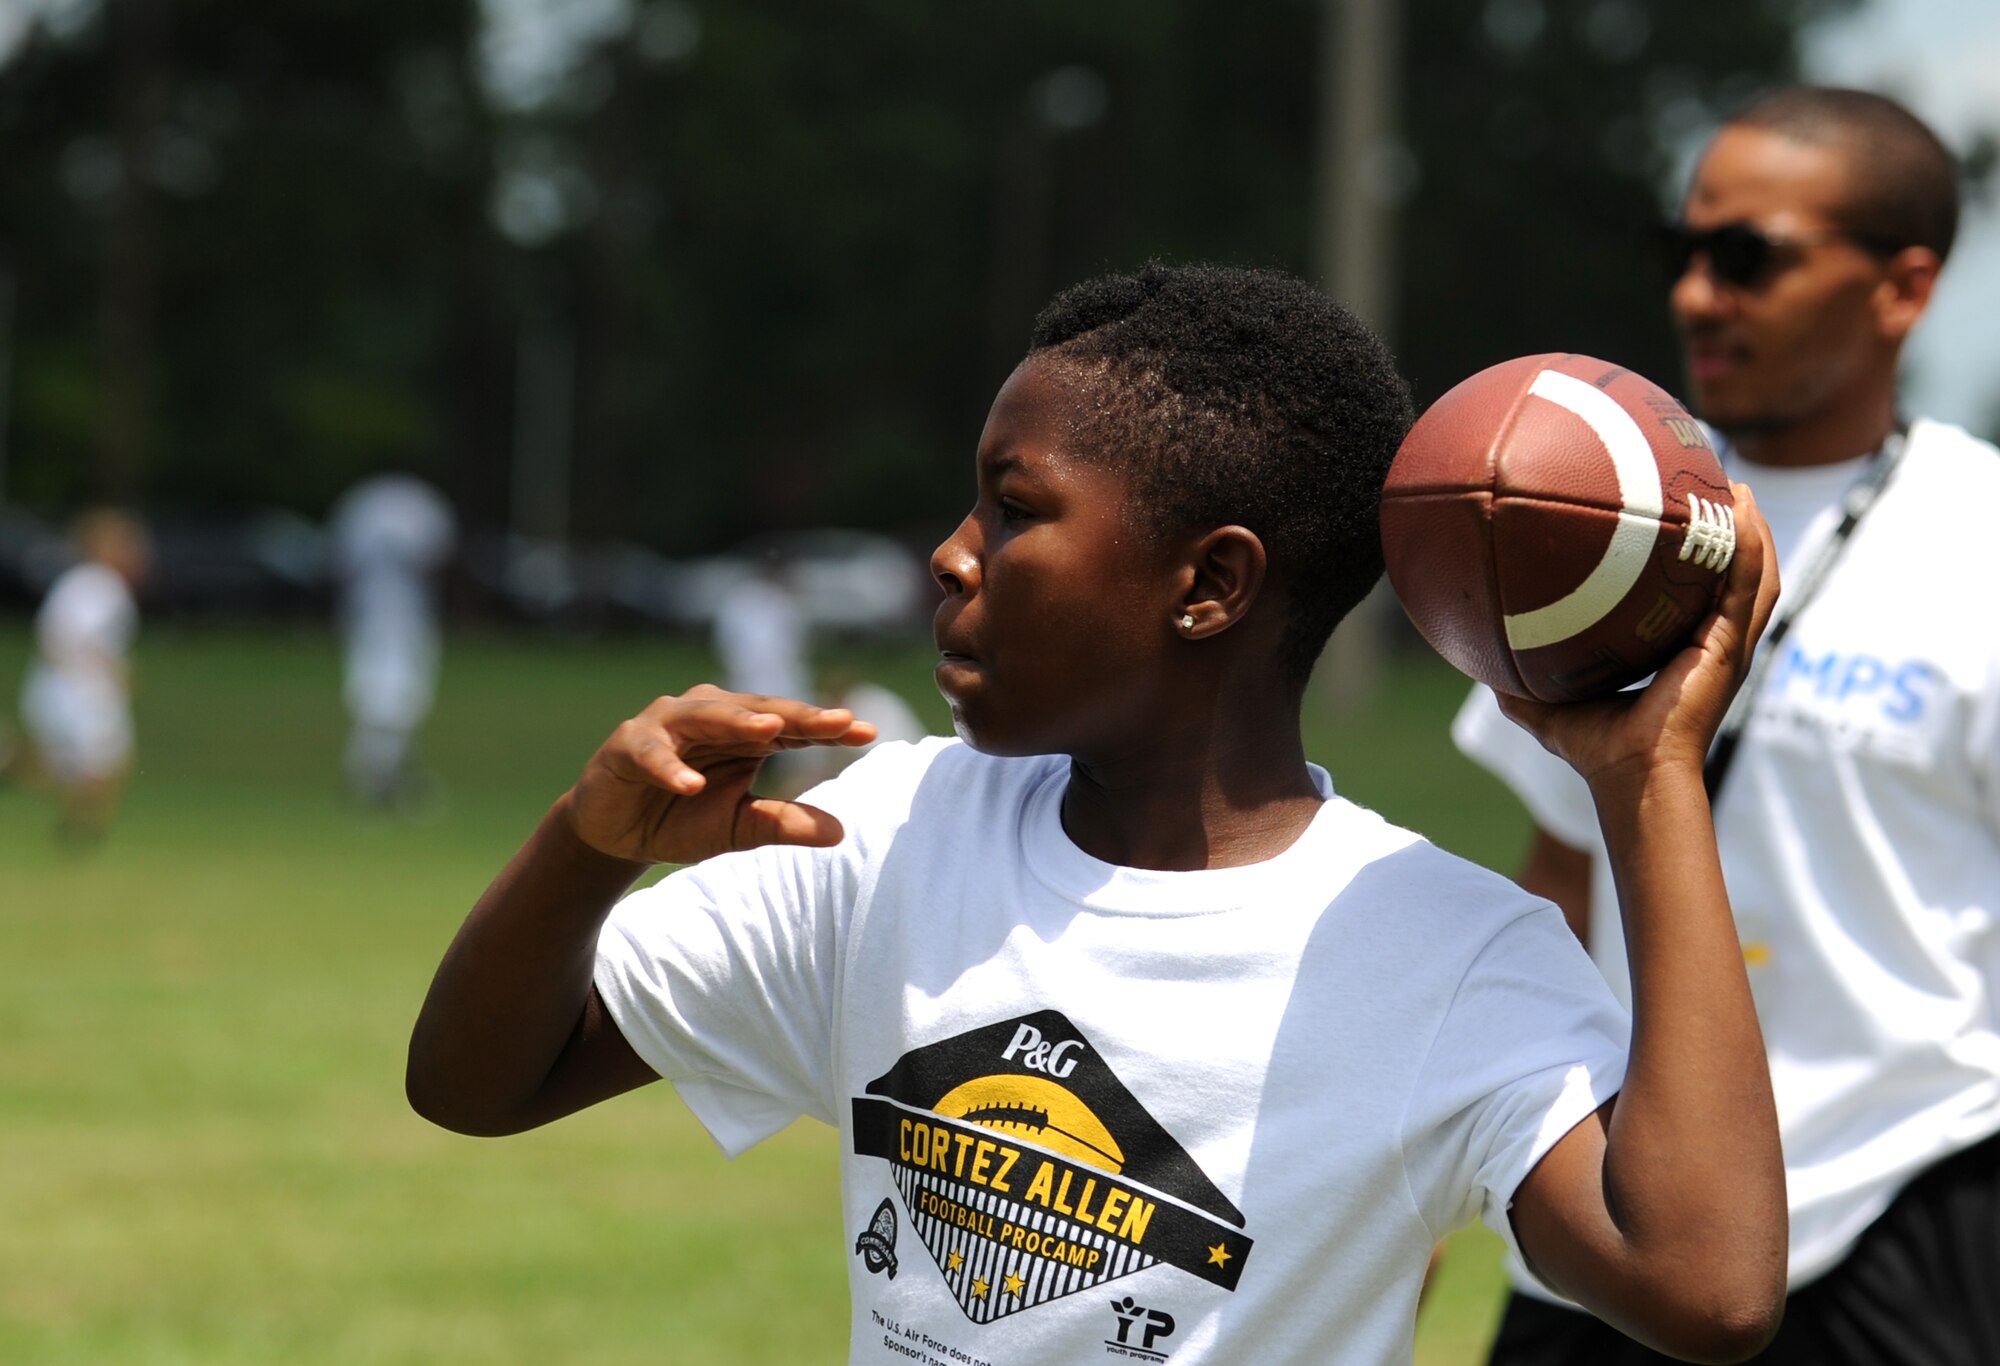 A young athlete practices his quarterback skills during a National Football League ProCamp, July 16, 2015, at Seymour Johnson Air Force Base, N.C. Cortez Allen, the Pittsburgh Steelers defensive back, was the camp’s guest athlete. (U.S. Air Force photo/Senior Airman Ashley J. Thum)